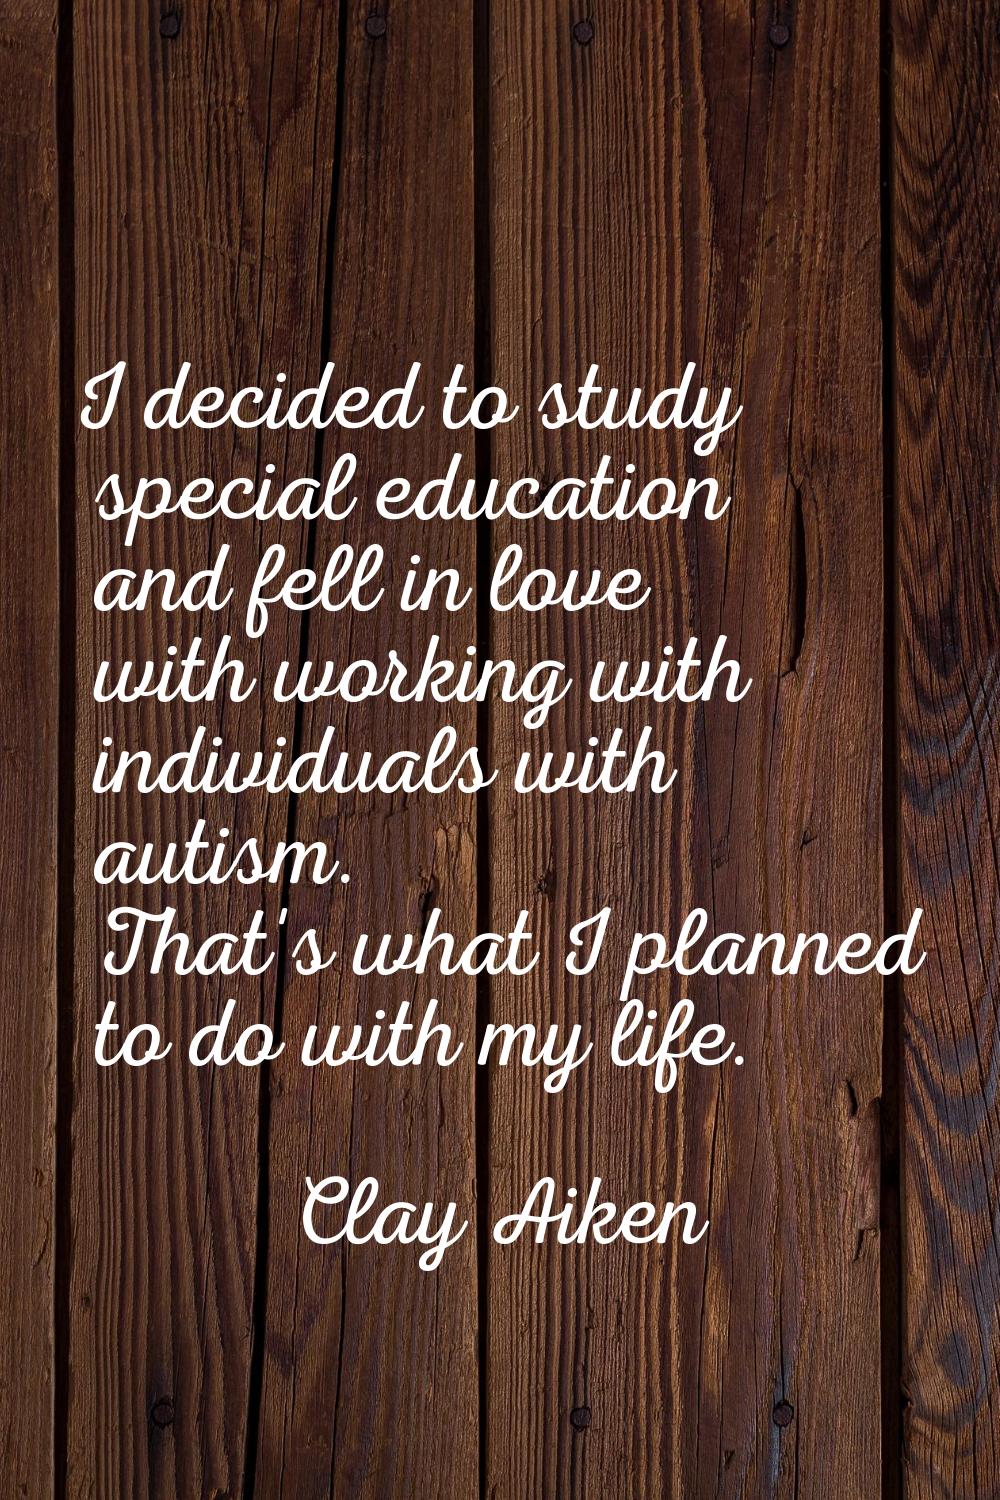 I decided to study special education and fell in love with working with individuals with autism. Th